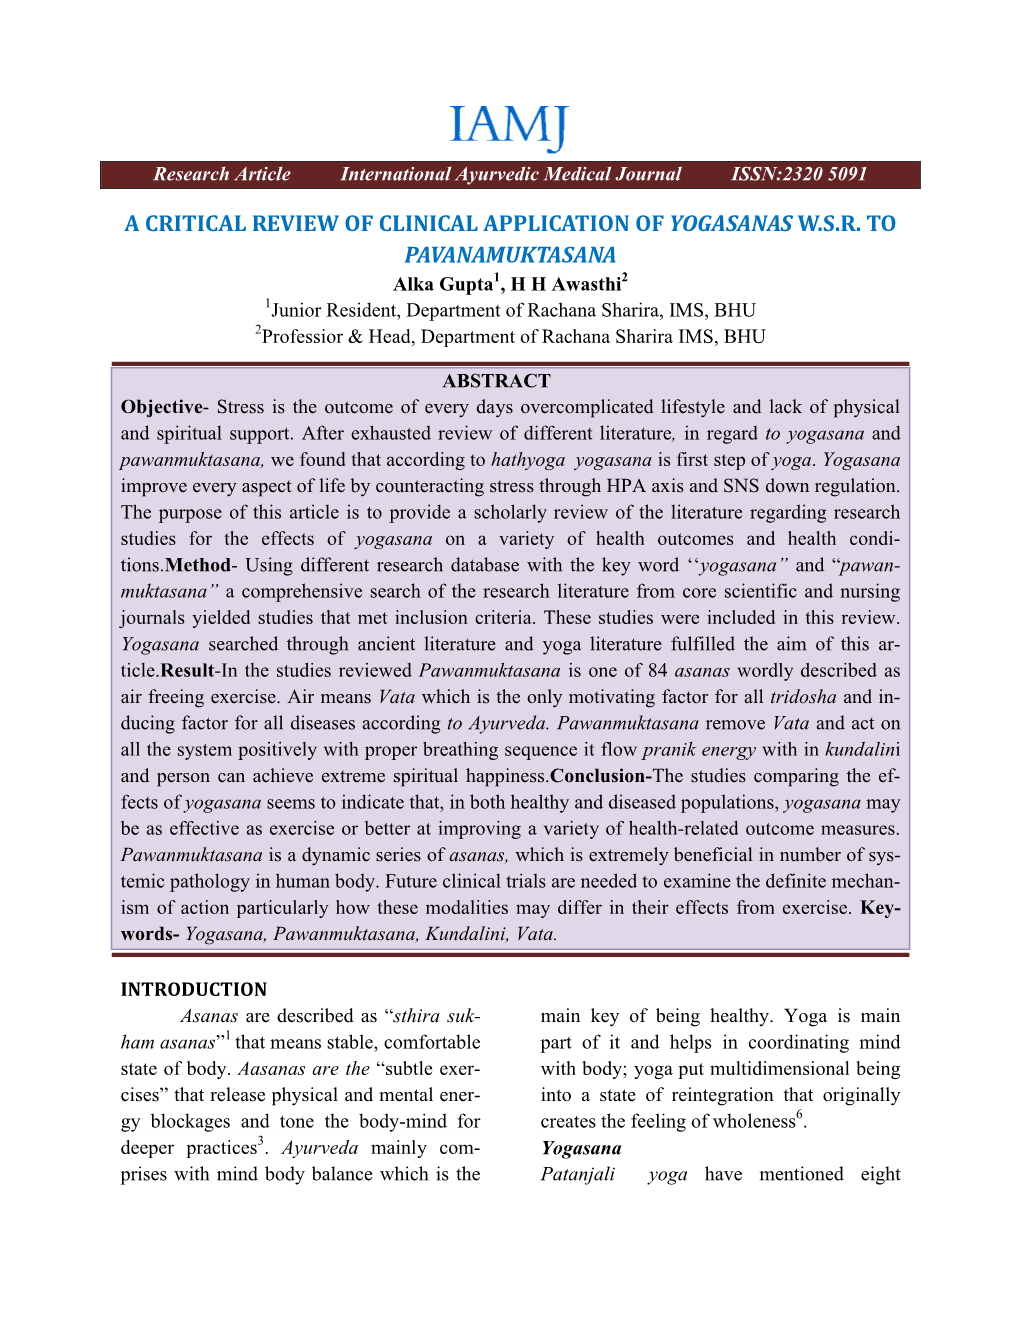 A Critical Review of Clinical Application of Yogasanas W.S.R